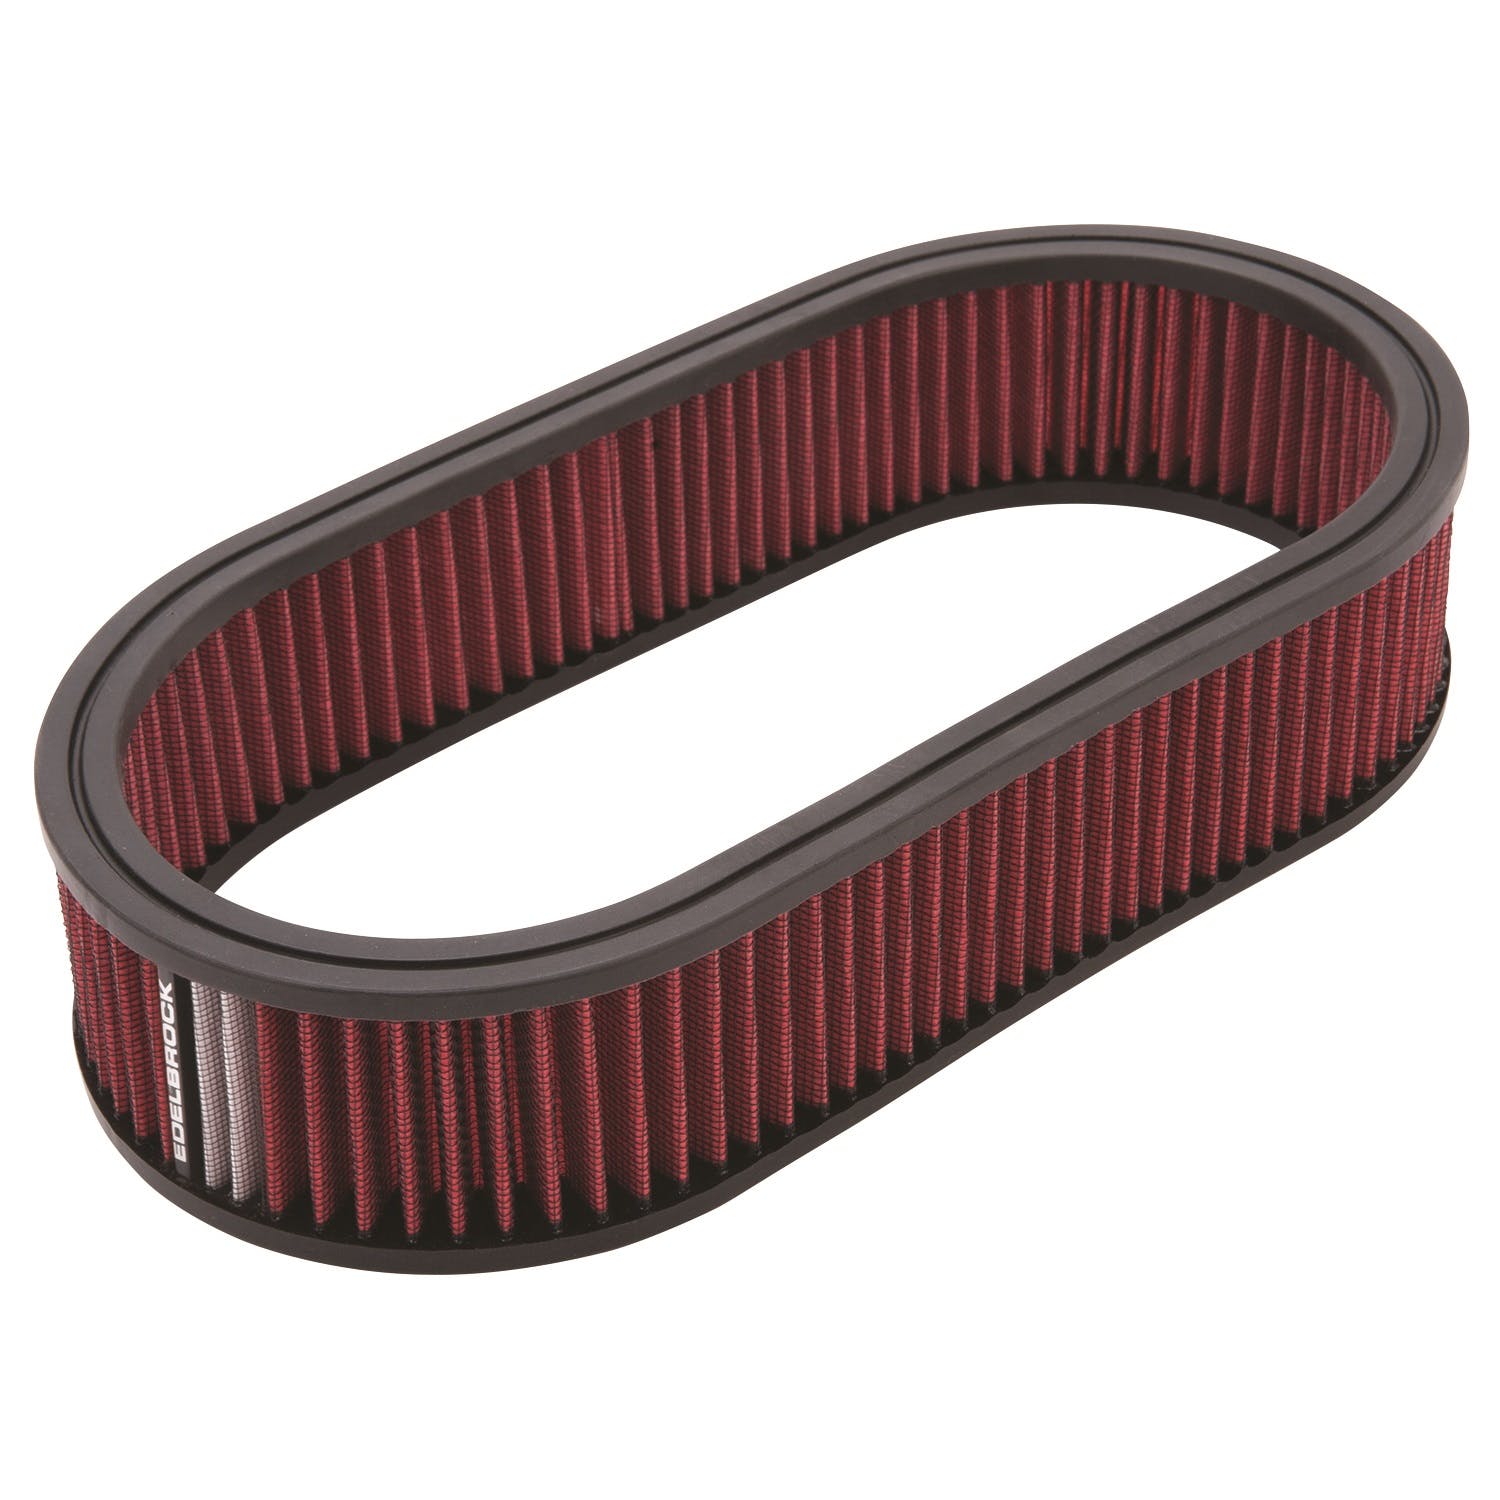 Edelbrock 1226 Replacement Pro-Flo Air Filter for Elite II Series 14 Round Air Cleaners